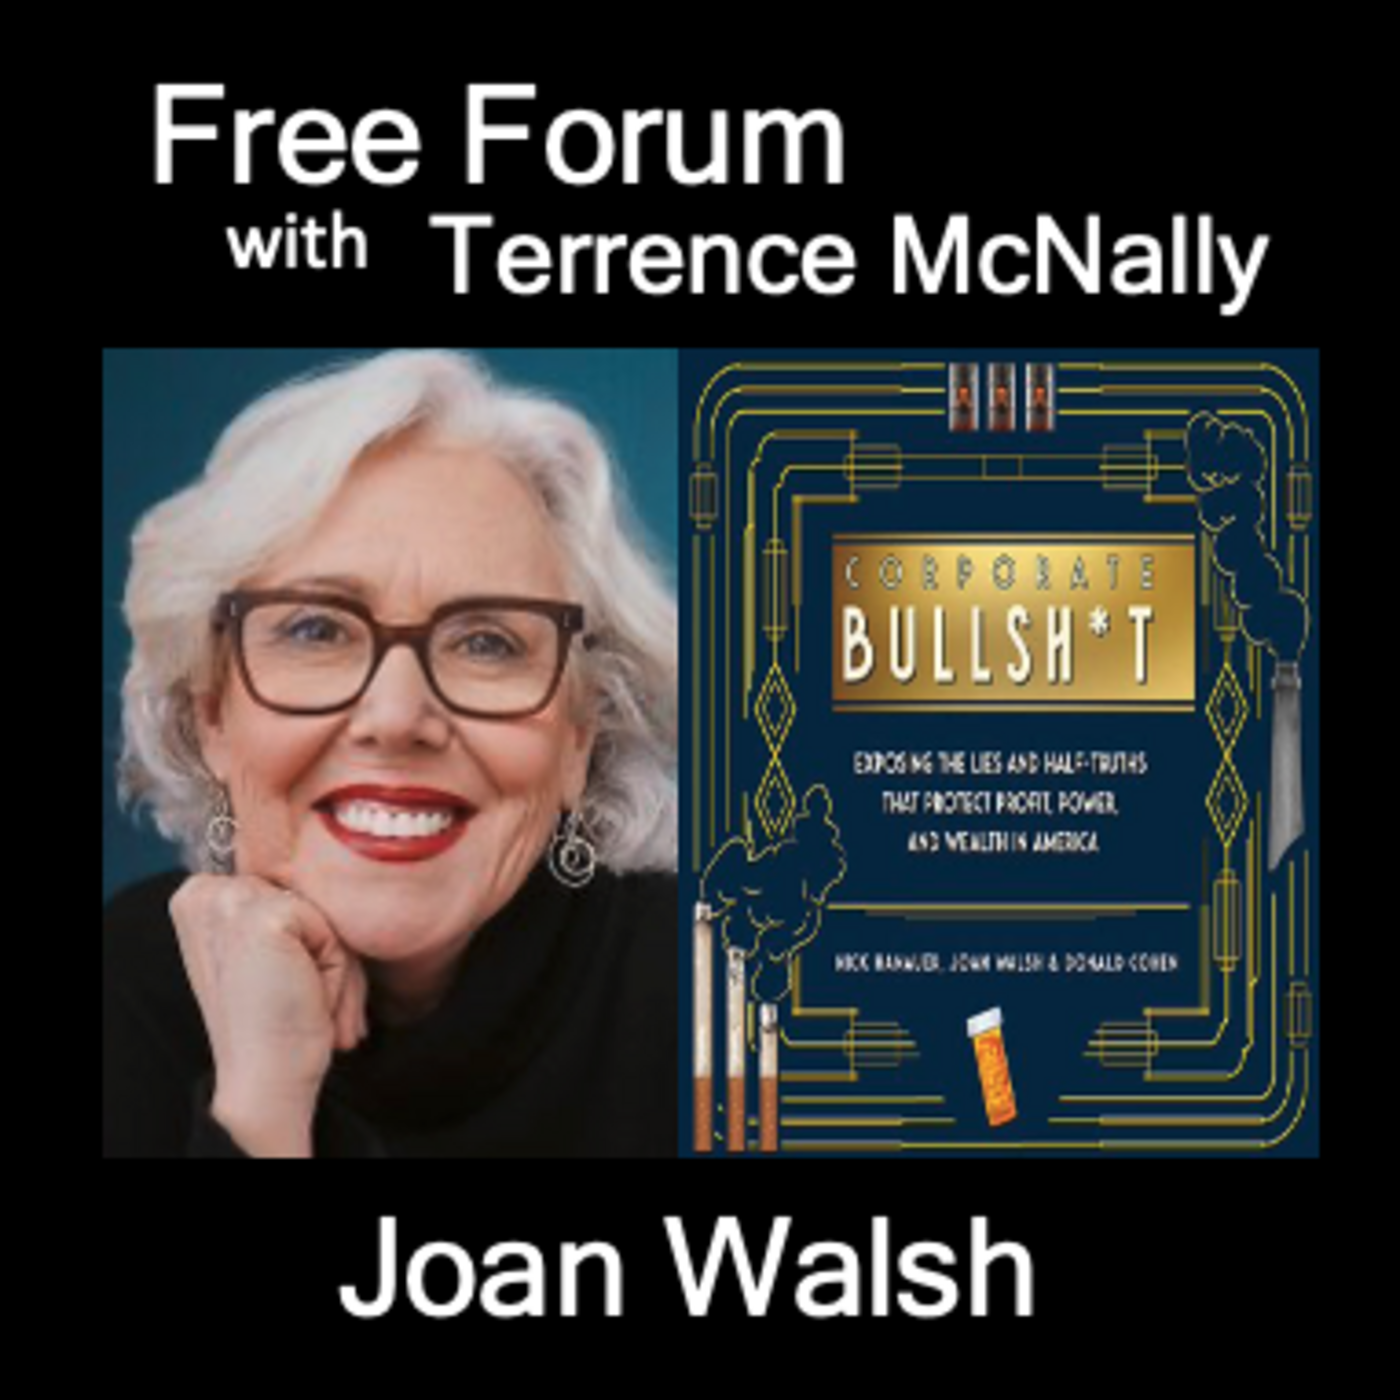 Episode 628: CORPORATE BULLSH*T- JOAN WALSH-Six lies they use to hold onto power and hold back progress